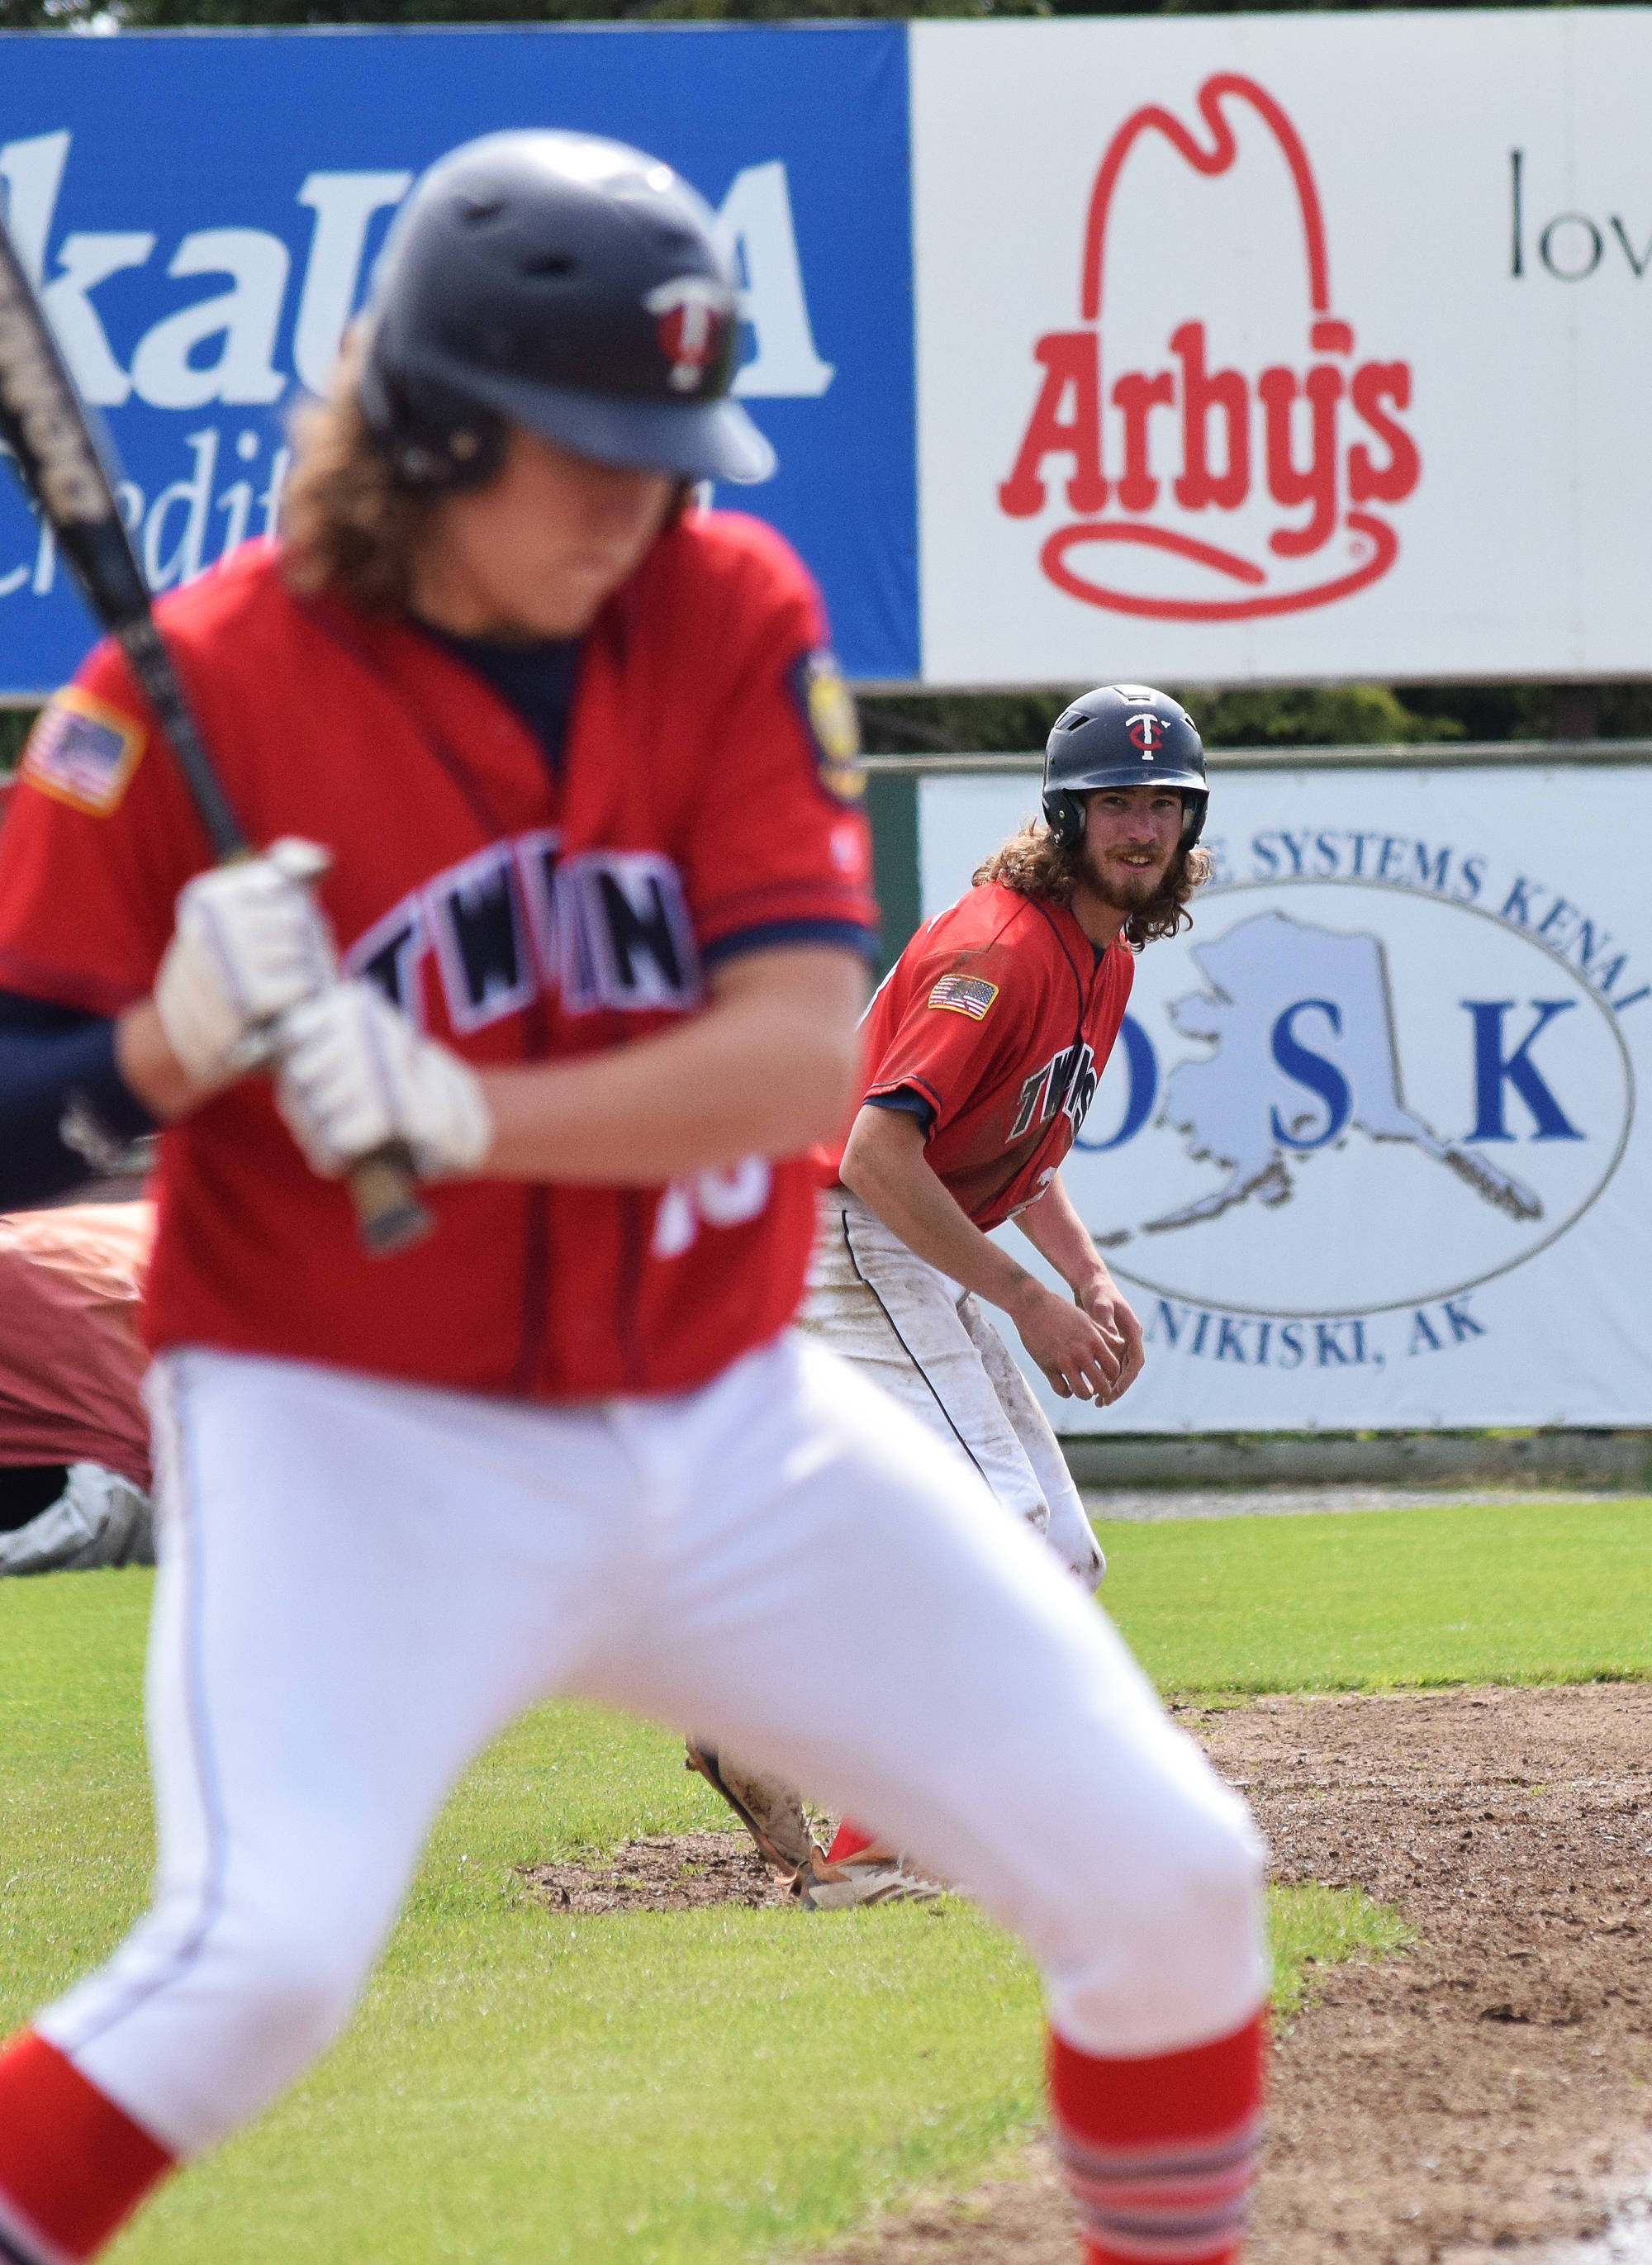 Legion Twins baserunner David Michael watches as teammate Logan Smith takes a pitch Wednesday afternoon from South Anchorage at Coral Seymour Memorial Ballpark. (Photo by Joey Klecka/Peninsula Clarion)